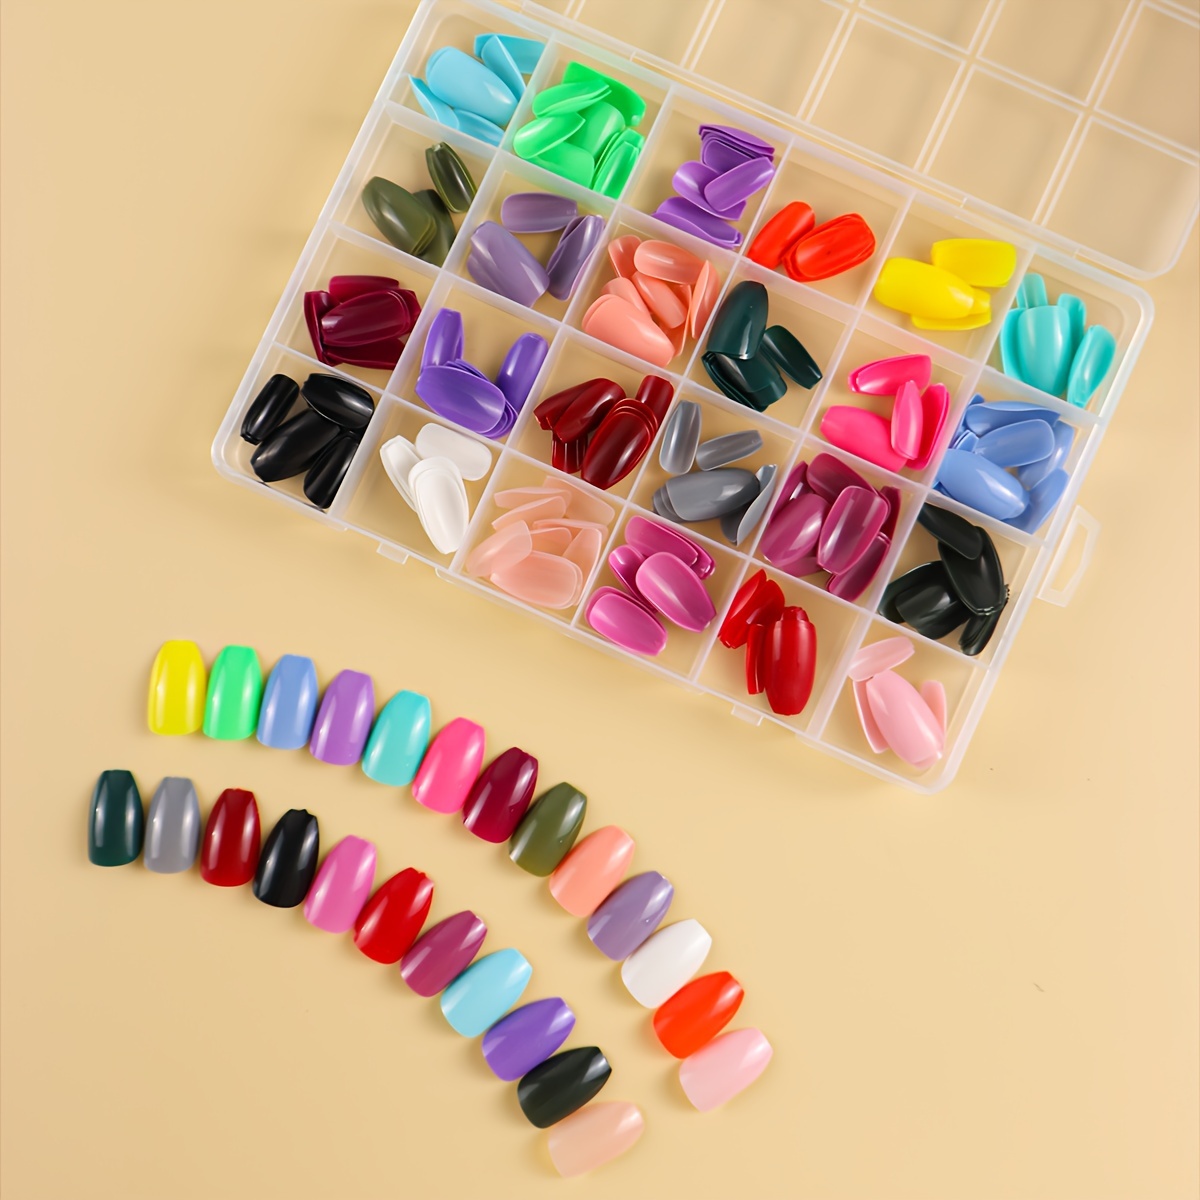 

576 Pieces Medium Square Ballet False Nails Kit, 24 Colors Artificial Glossy Coffin Nails, Fake Nails For Ladies